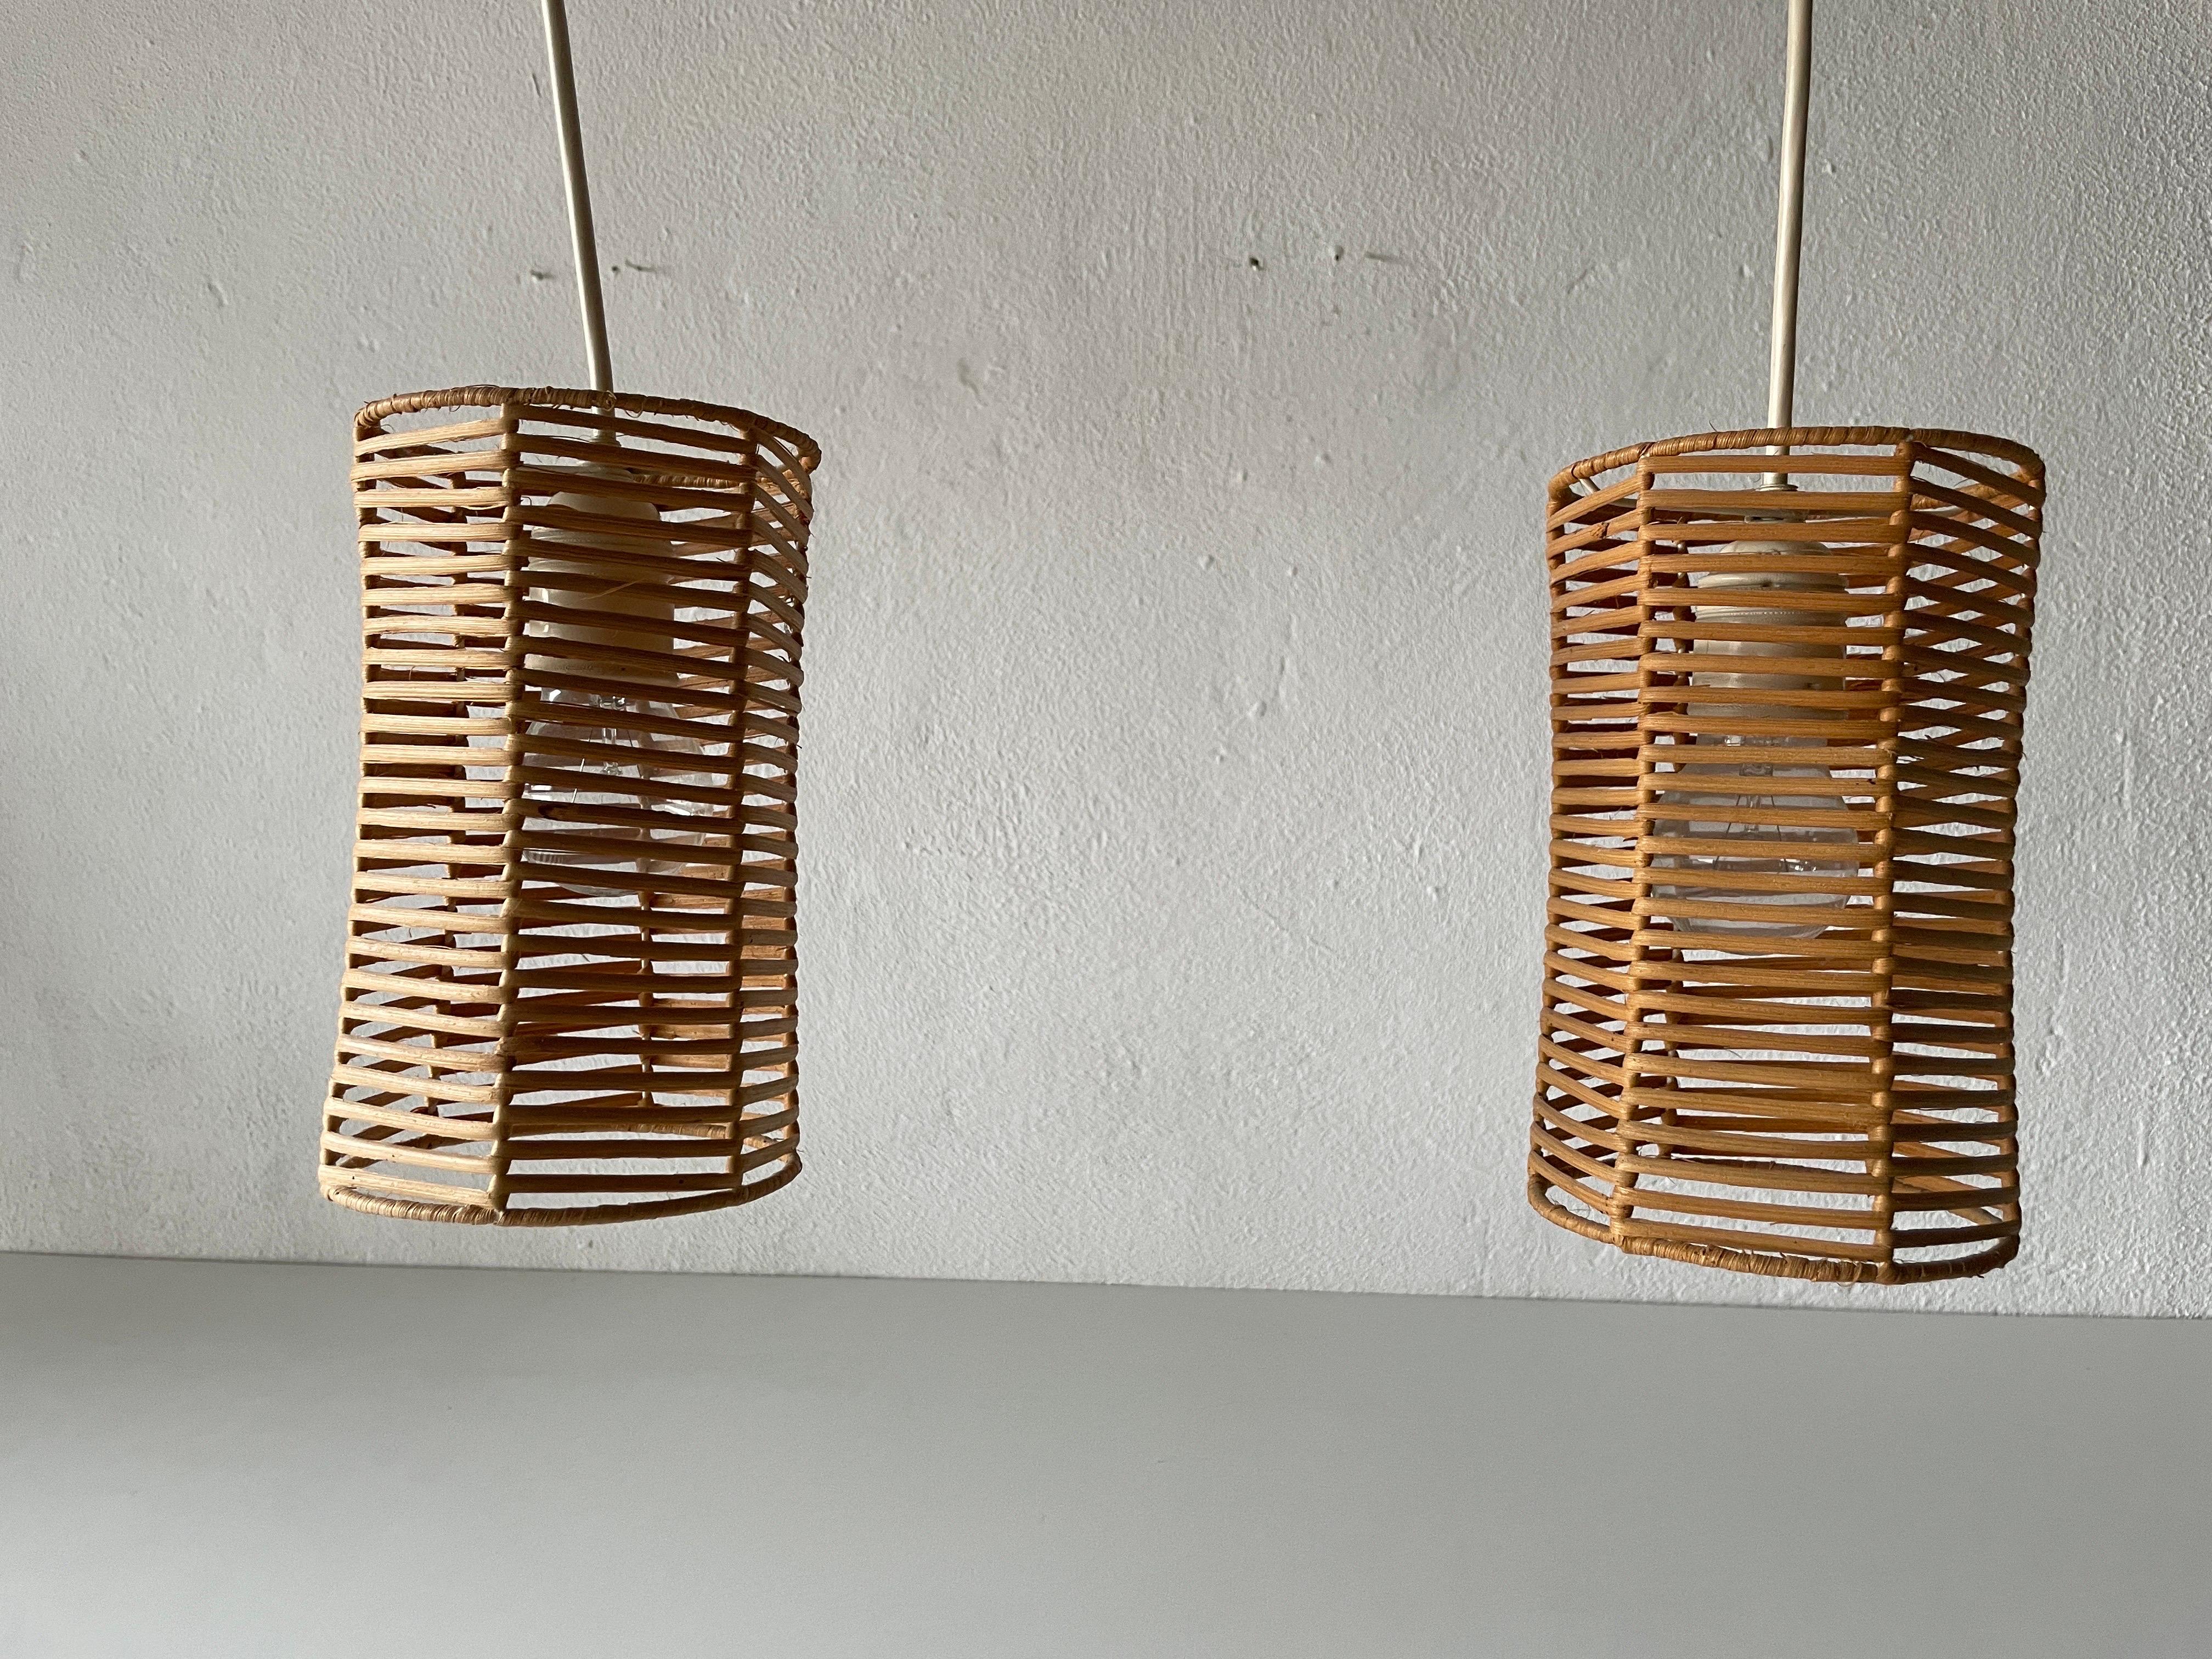 Mid-20th Century Double Shade Wicker and Wood Pendant Lamp, 1960s, Germany For Sale